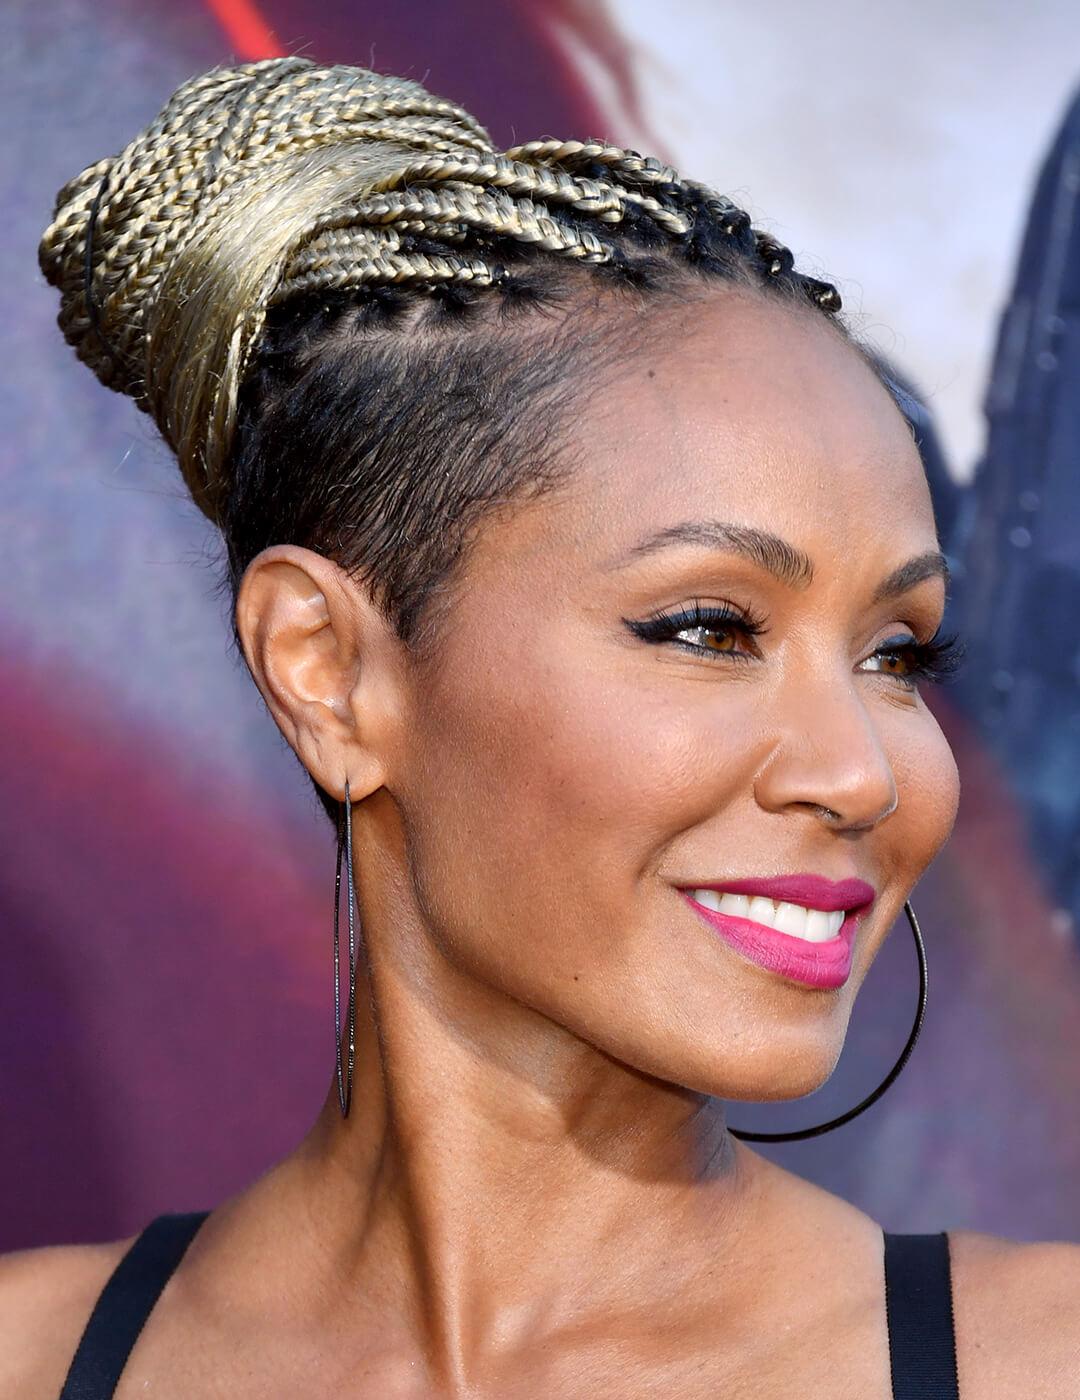 Jada Pinkett Smith rocking a long pixie undercut hairstyle with blonde braids at the red carpet